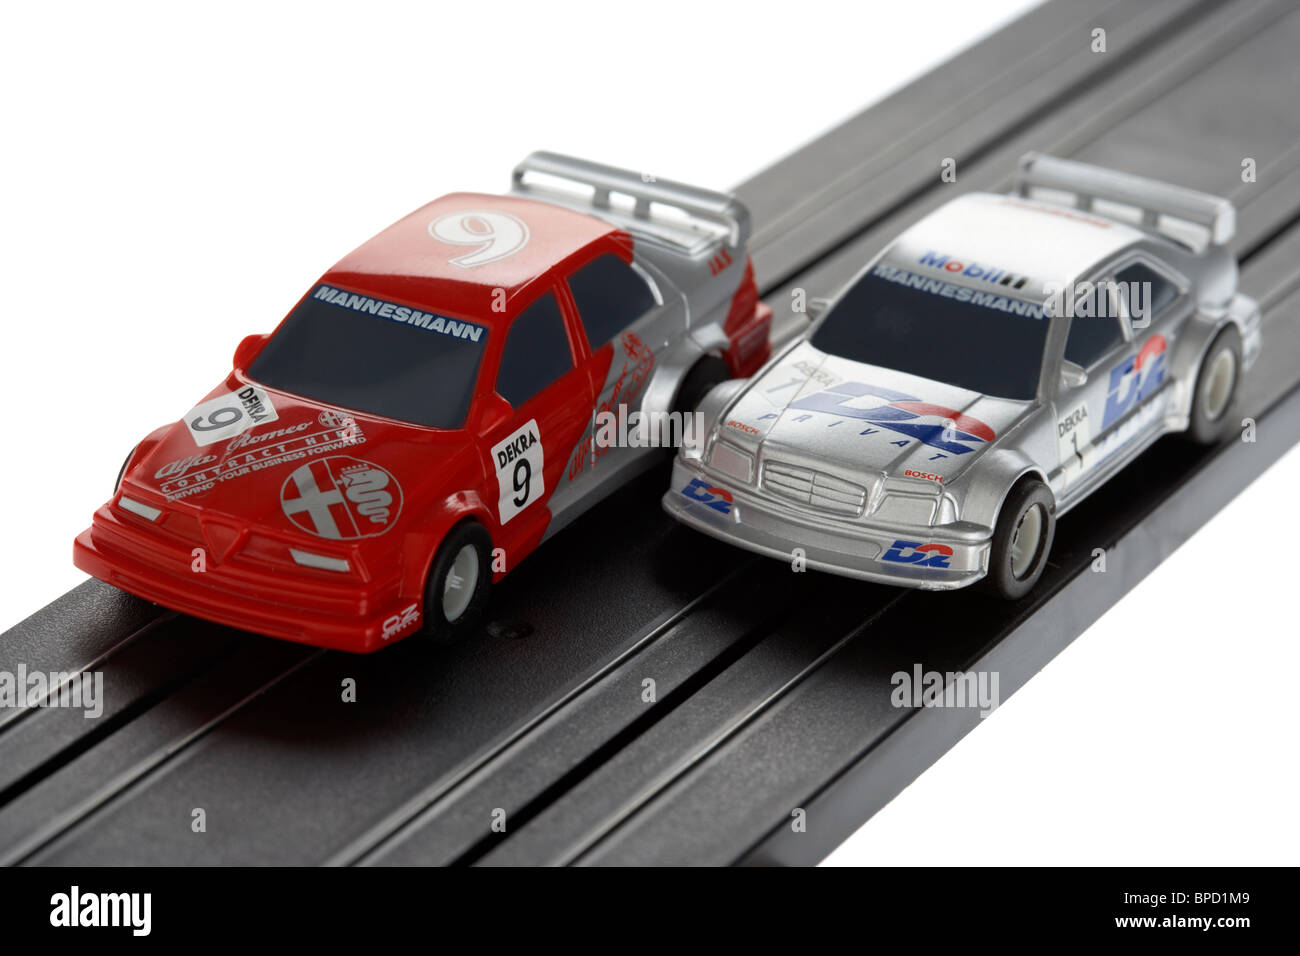 micro slot racing cars on track from the 1980s historic boys toy manufactured by scalextric Stock Photo